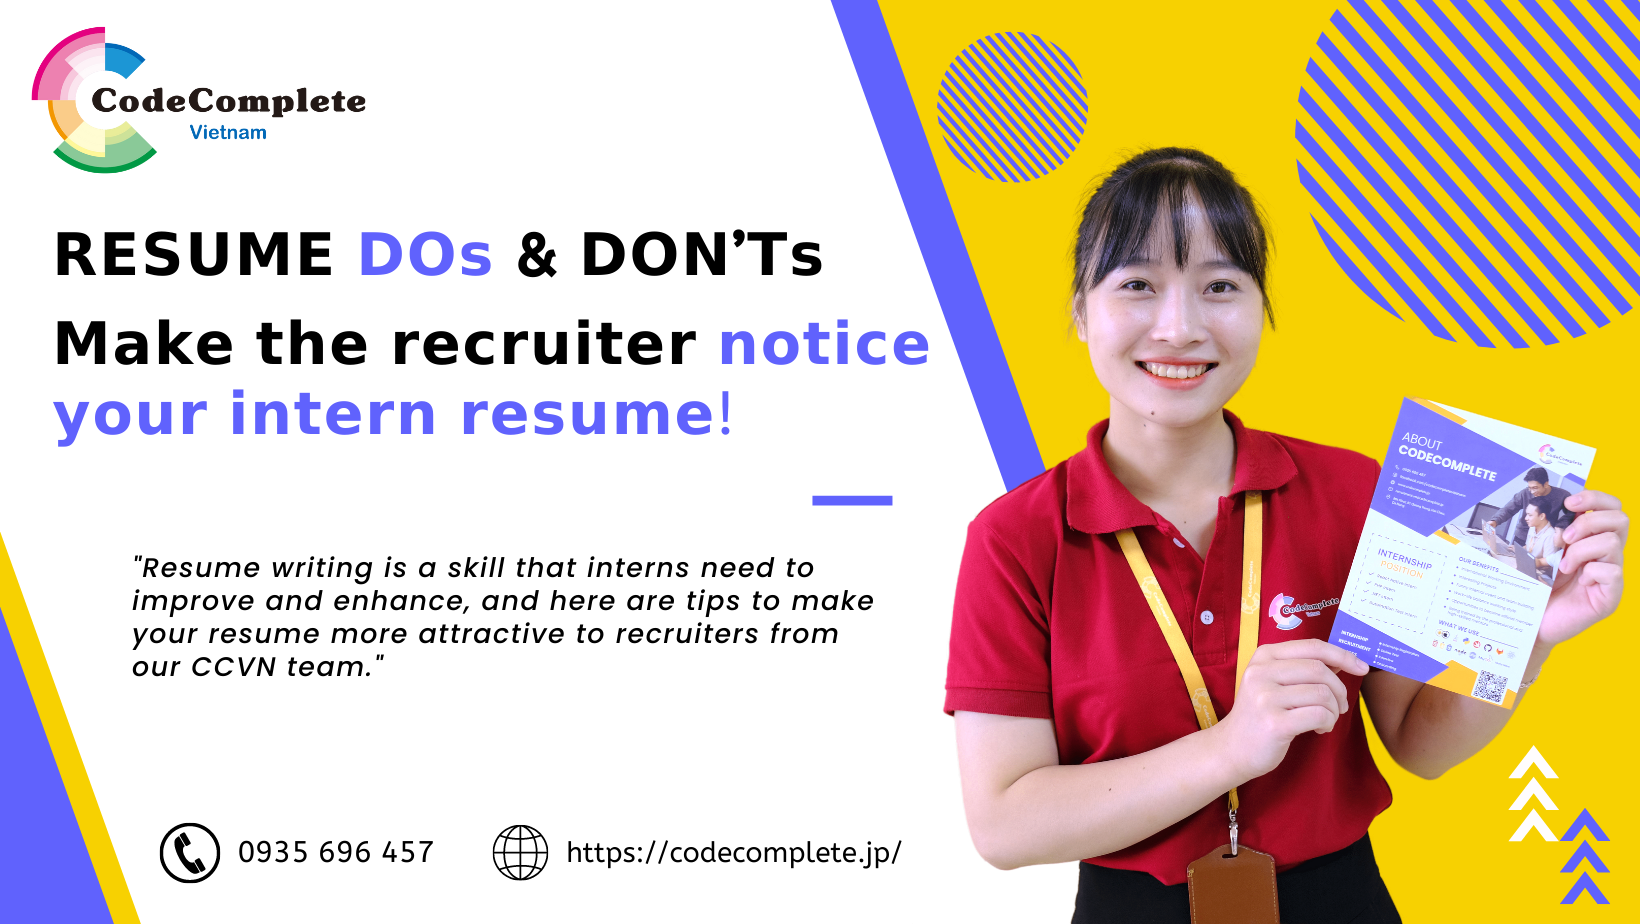 codecomplete-resume-do-dont1